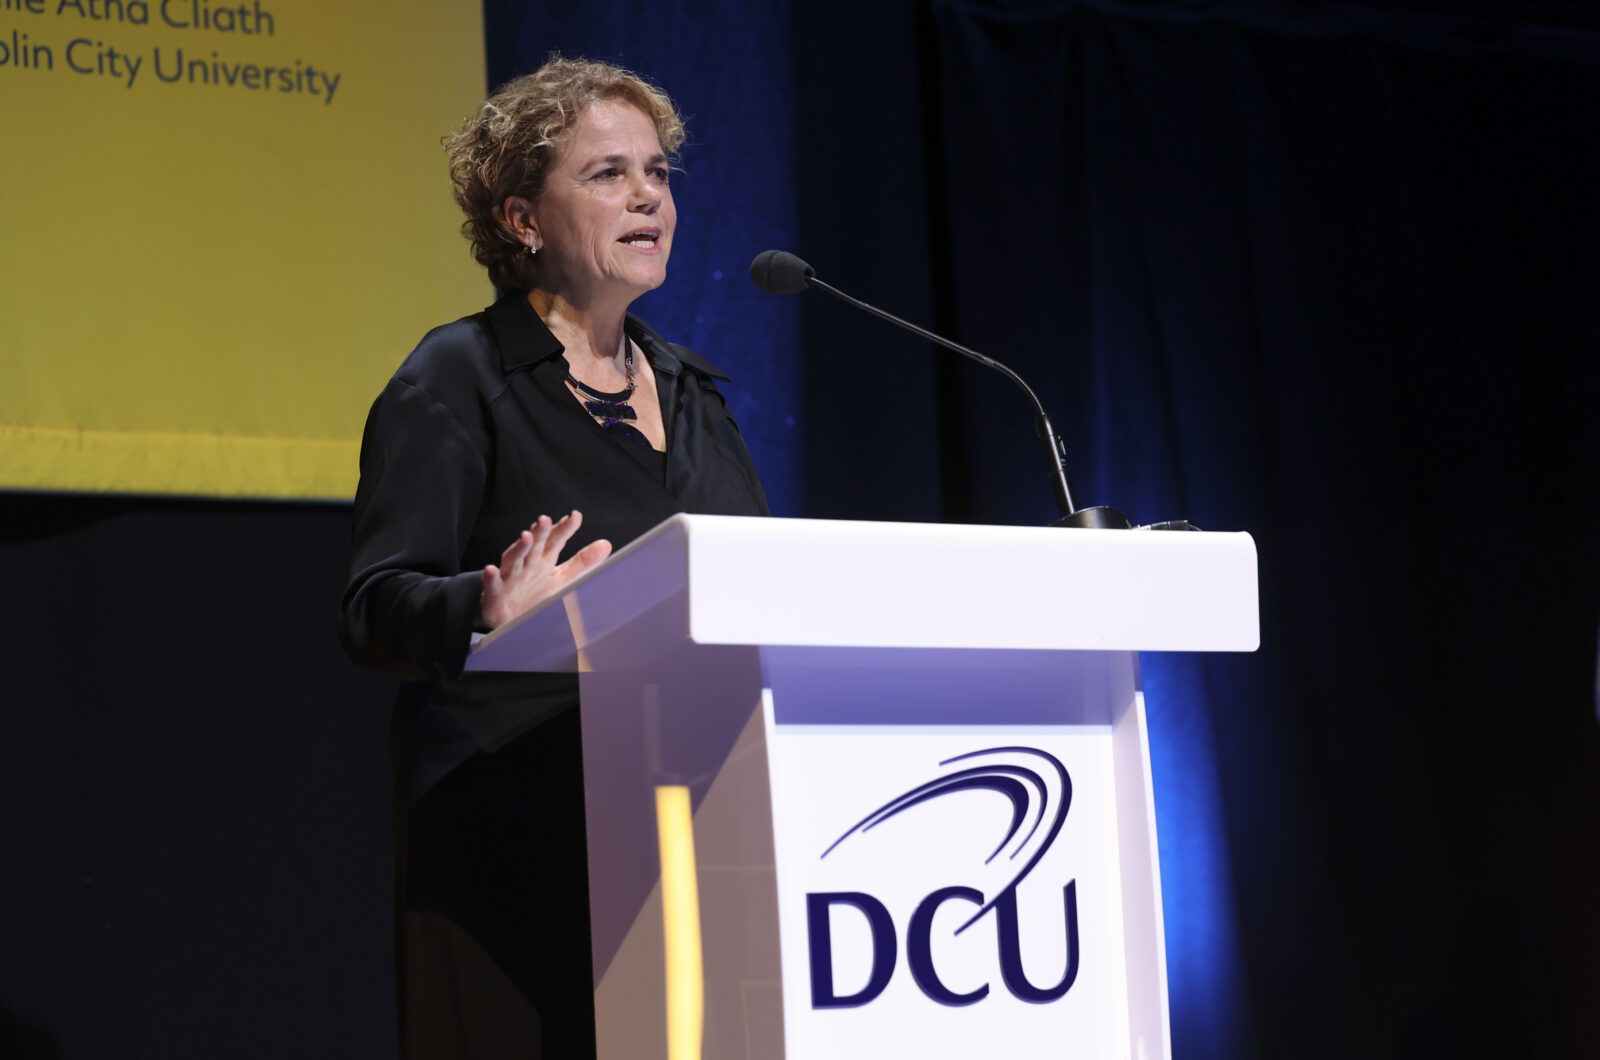 Community Foundation Ireland Chief Executive Denise Charlton accepting award from DCU on behalf of donors, supporters and partners of the Foundation in February 2024.